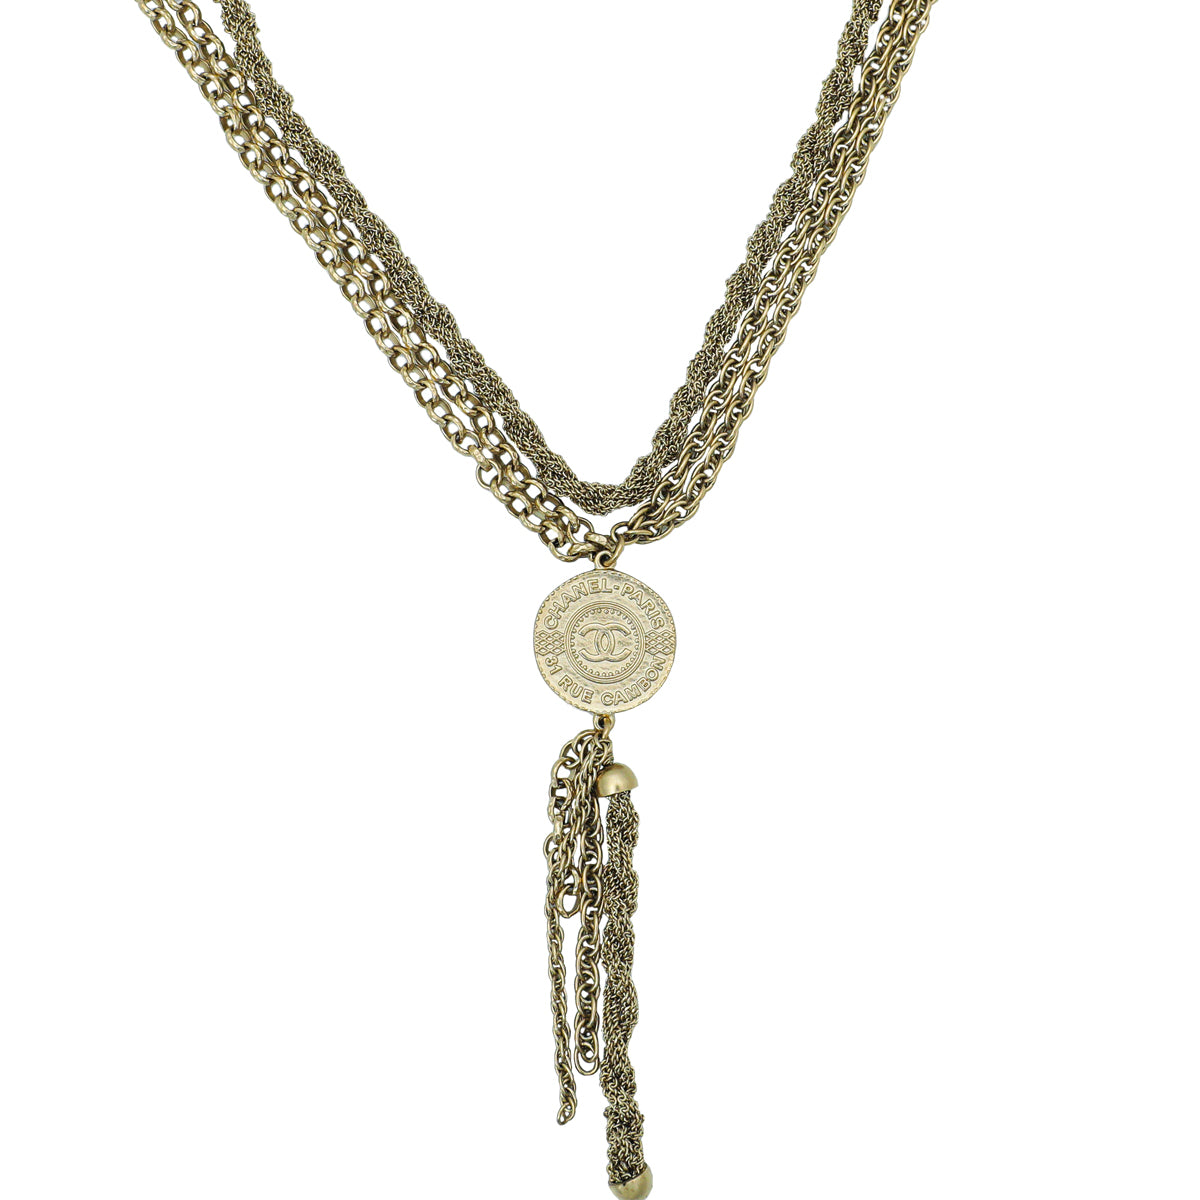 Chanel Light Gold Finish Multi Chain Medallion Long Necklace